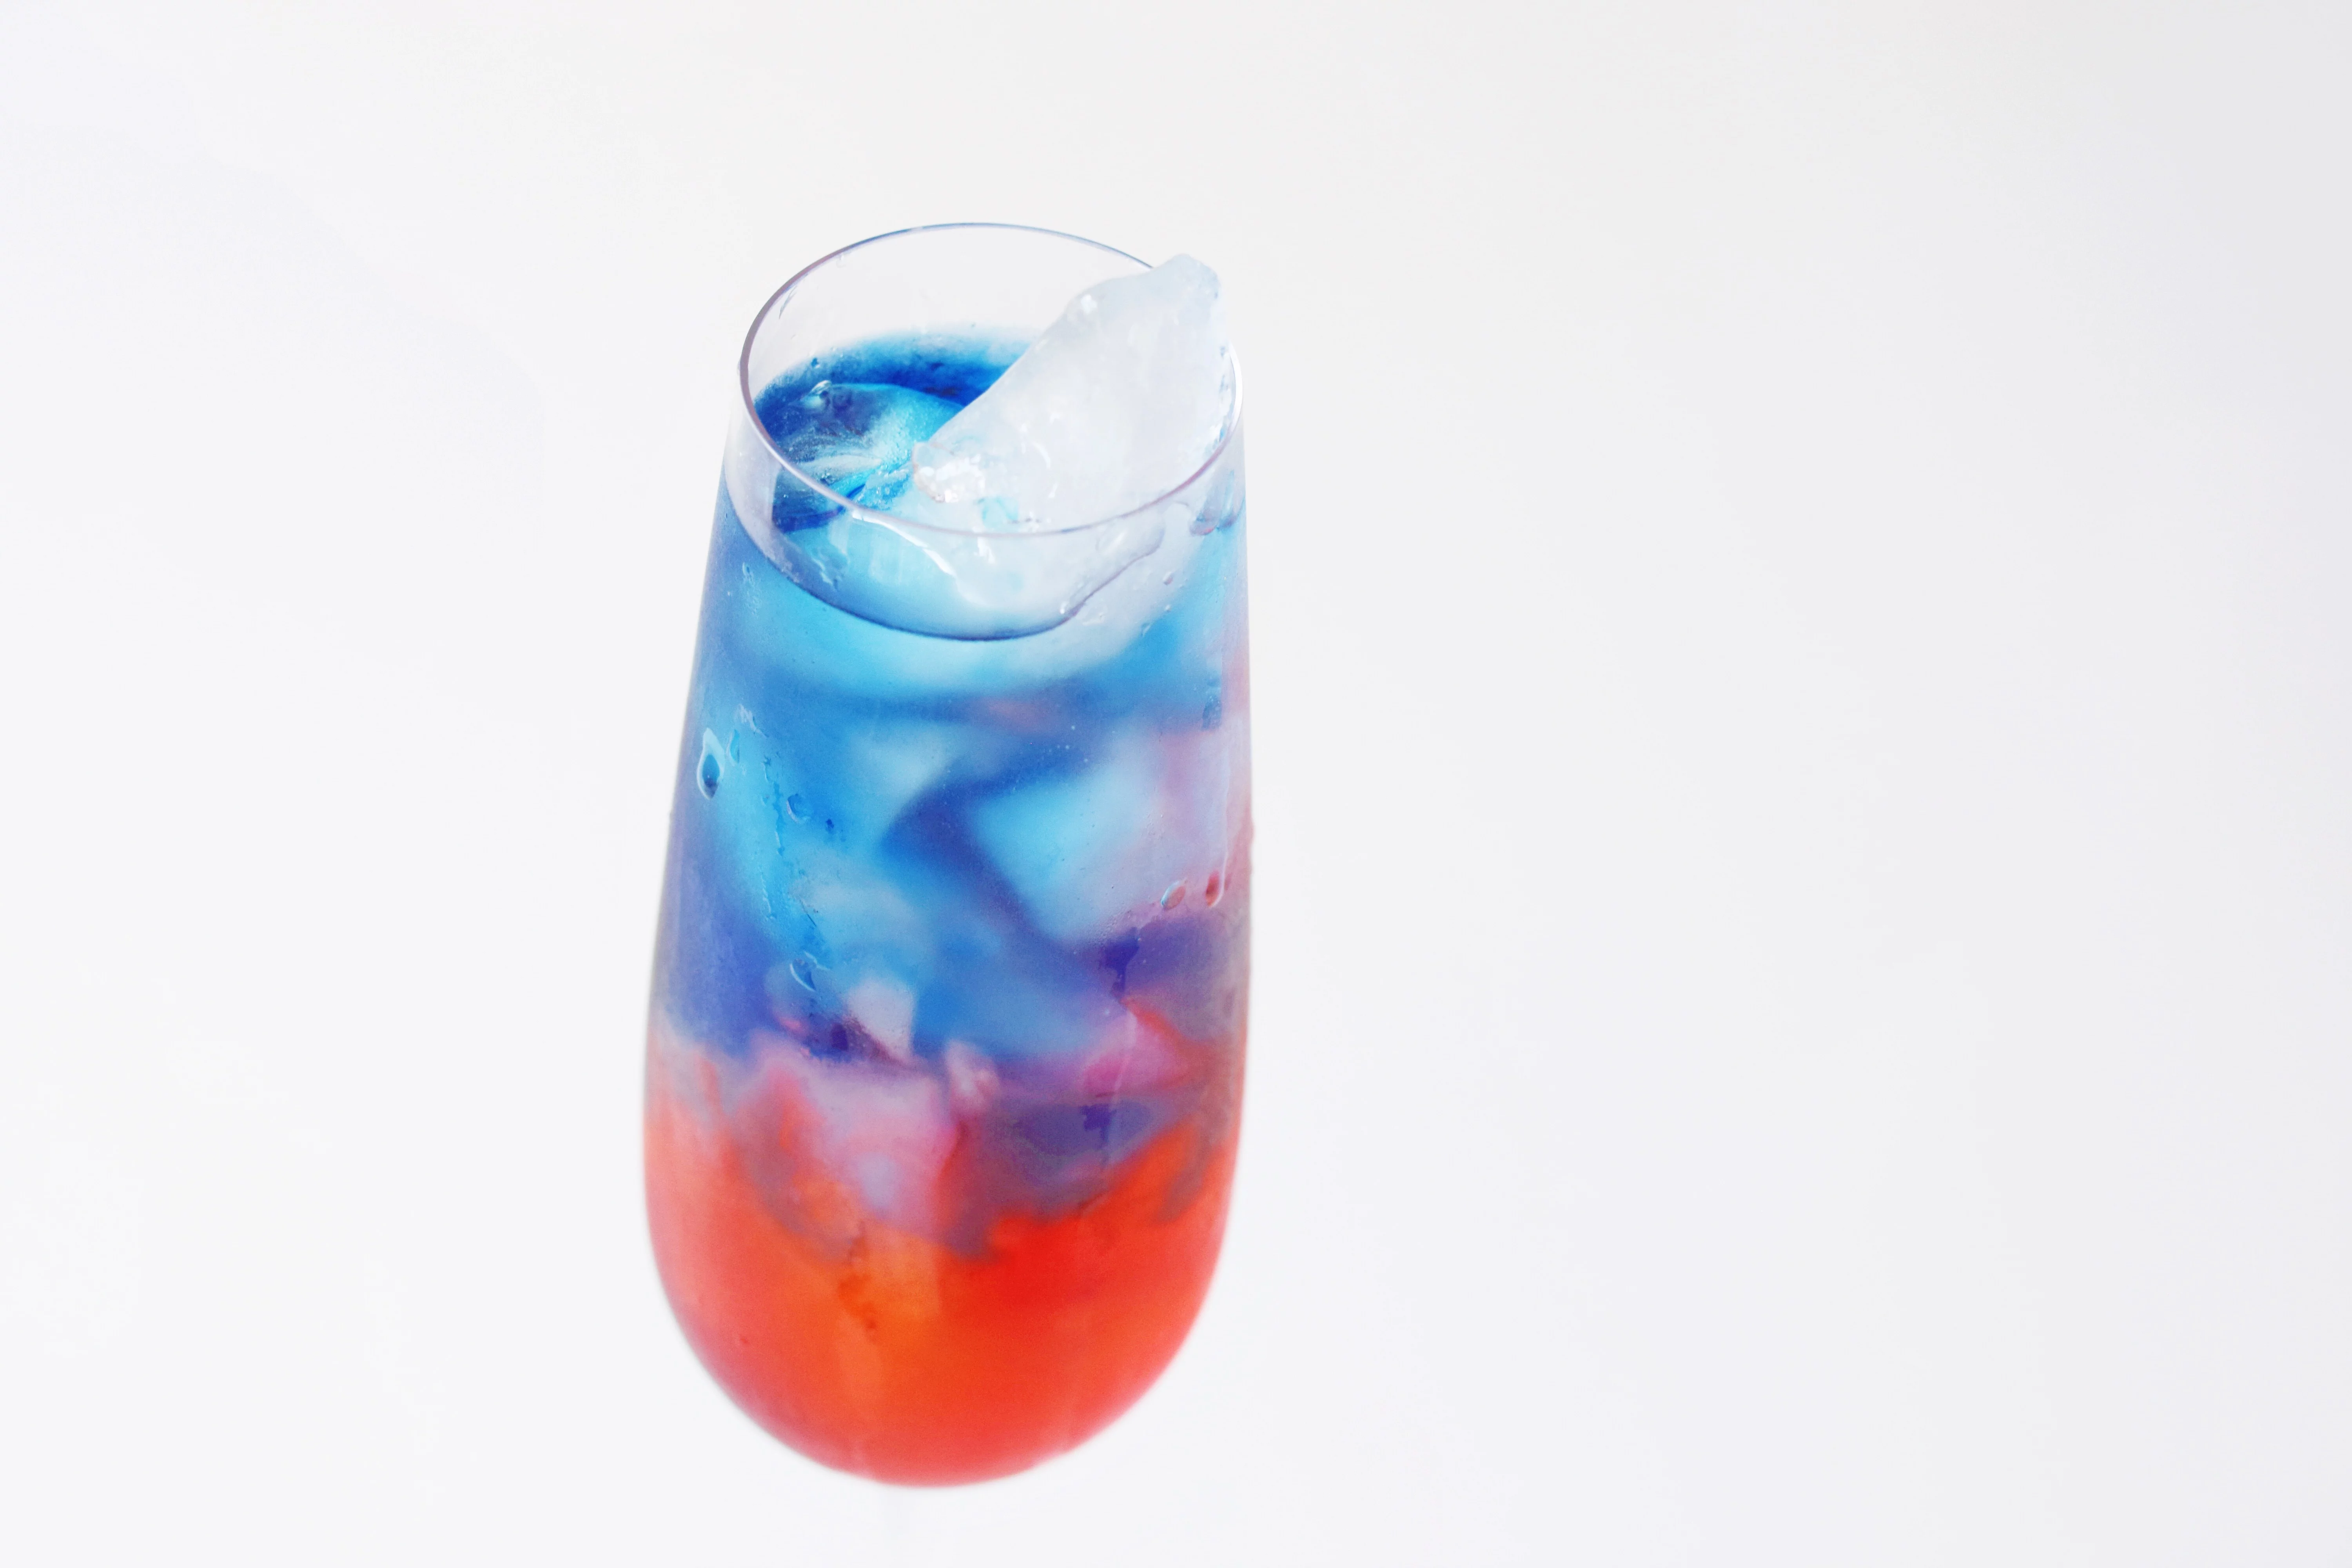 Flirty Firecracker Cocktail - 4th of July - Patriotic Drink - Communikait by Kait Hanson #patriotic #cocktail #recipe #4thofJuly #fourthofjuly #drink